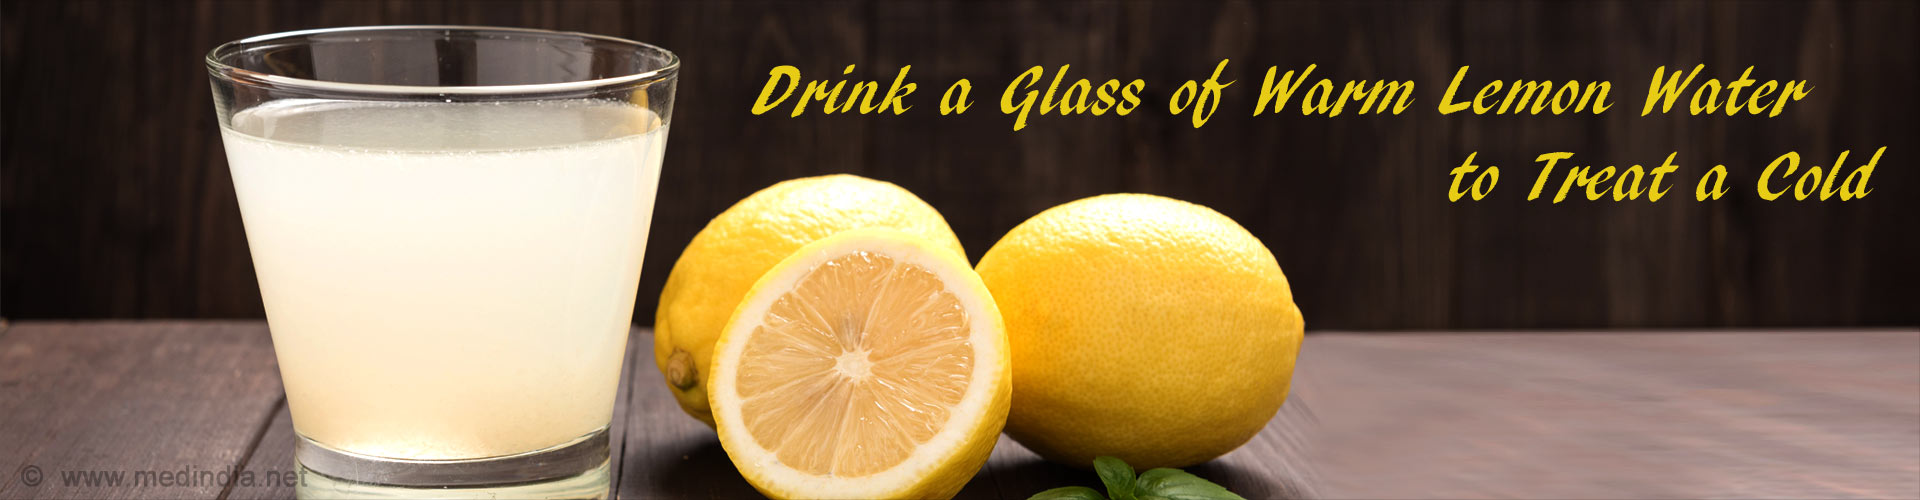 Drink a Glass of Warm Lemon Water to Treat a Cold
